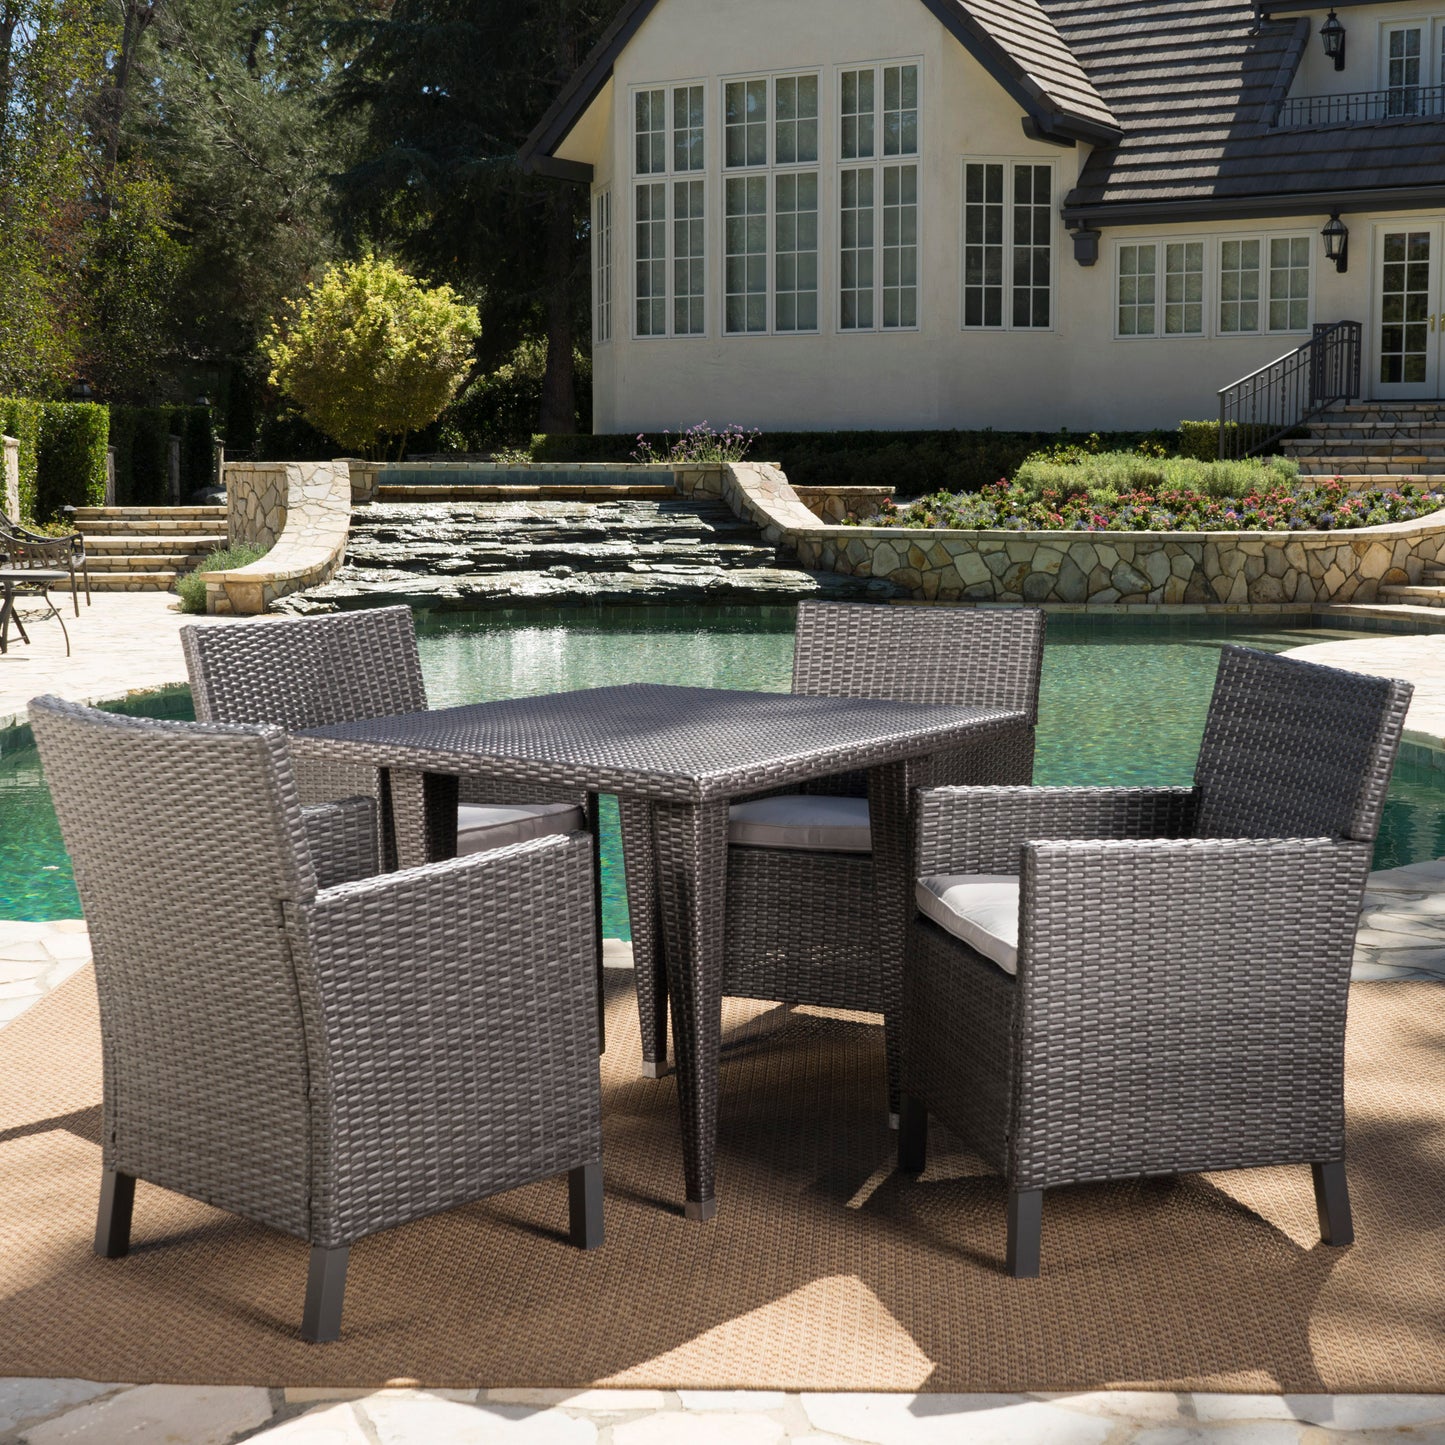 Cerrenne Outdoor 5 Piece Wicker Dining Set with Water Resistant Cushions